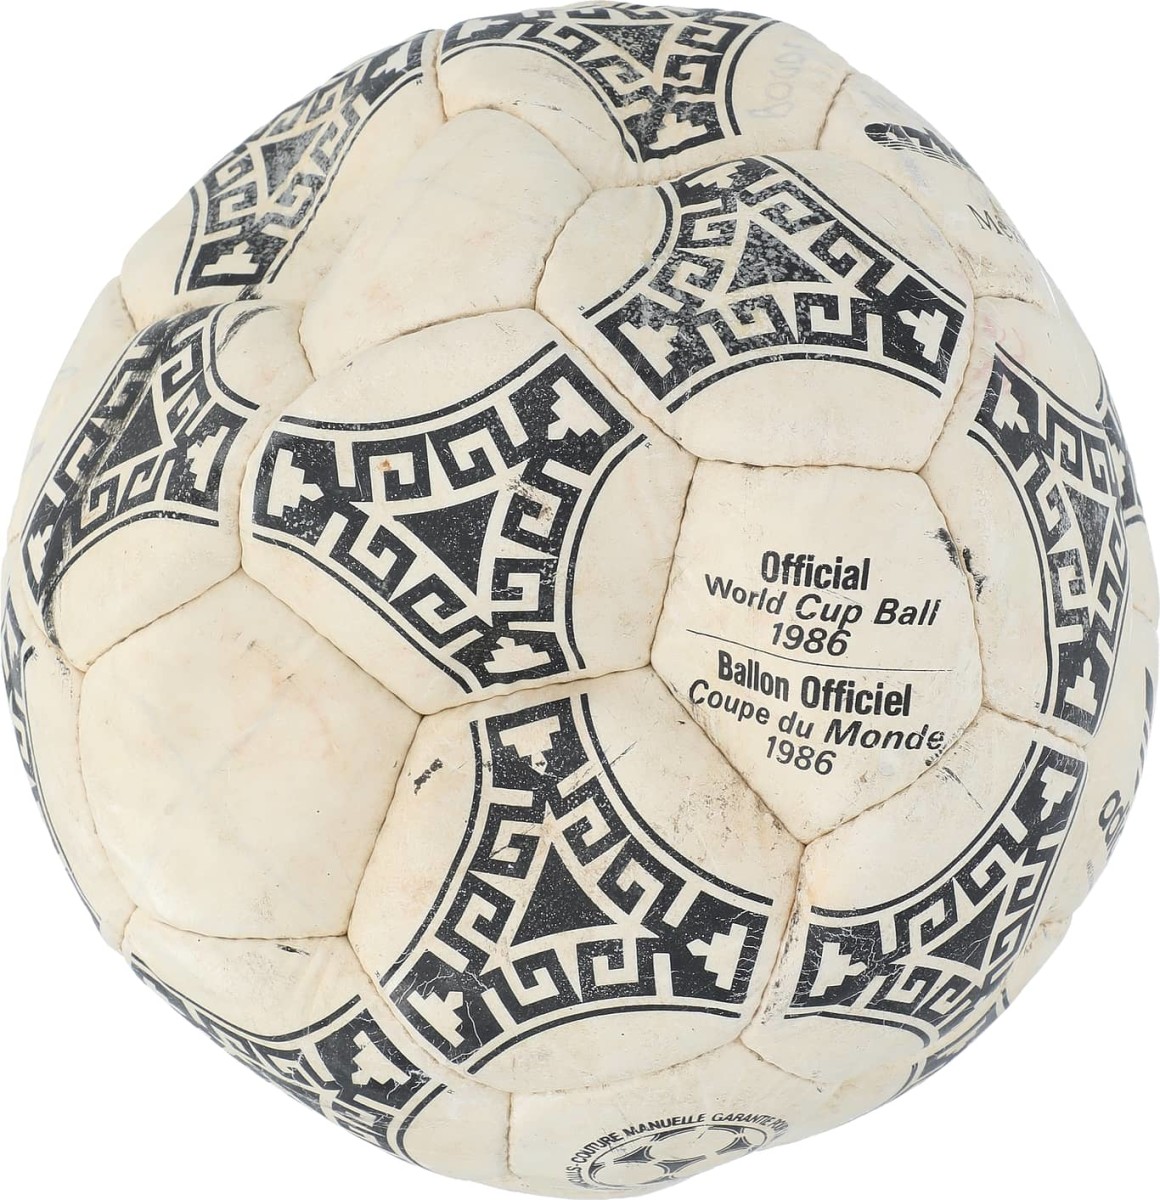 The ball Diego Maradona kicked to score the famous “Hand of God” goal in the 1986 World Cup.